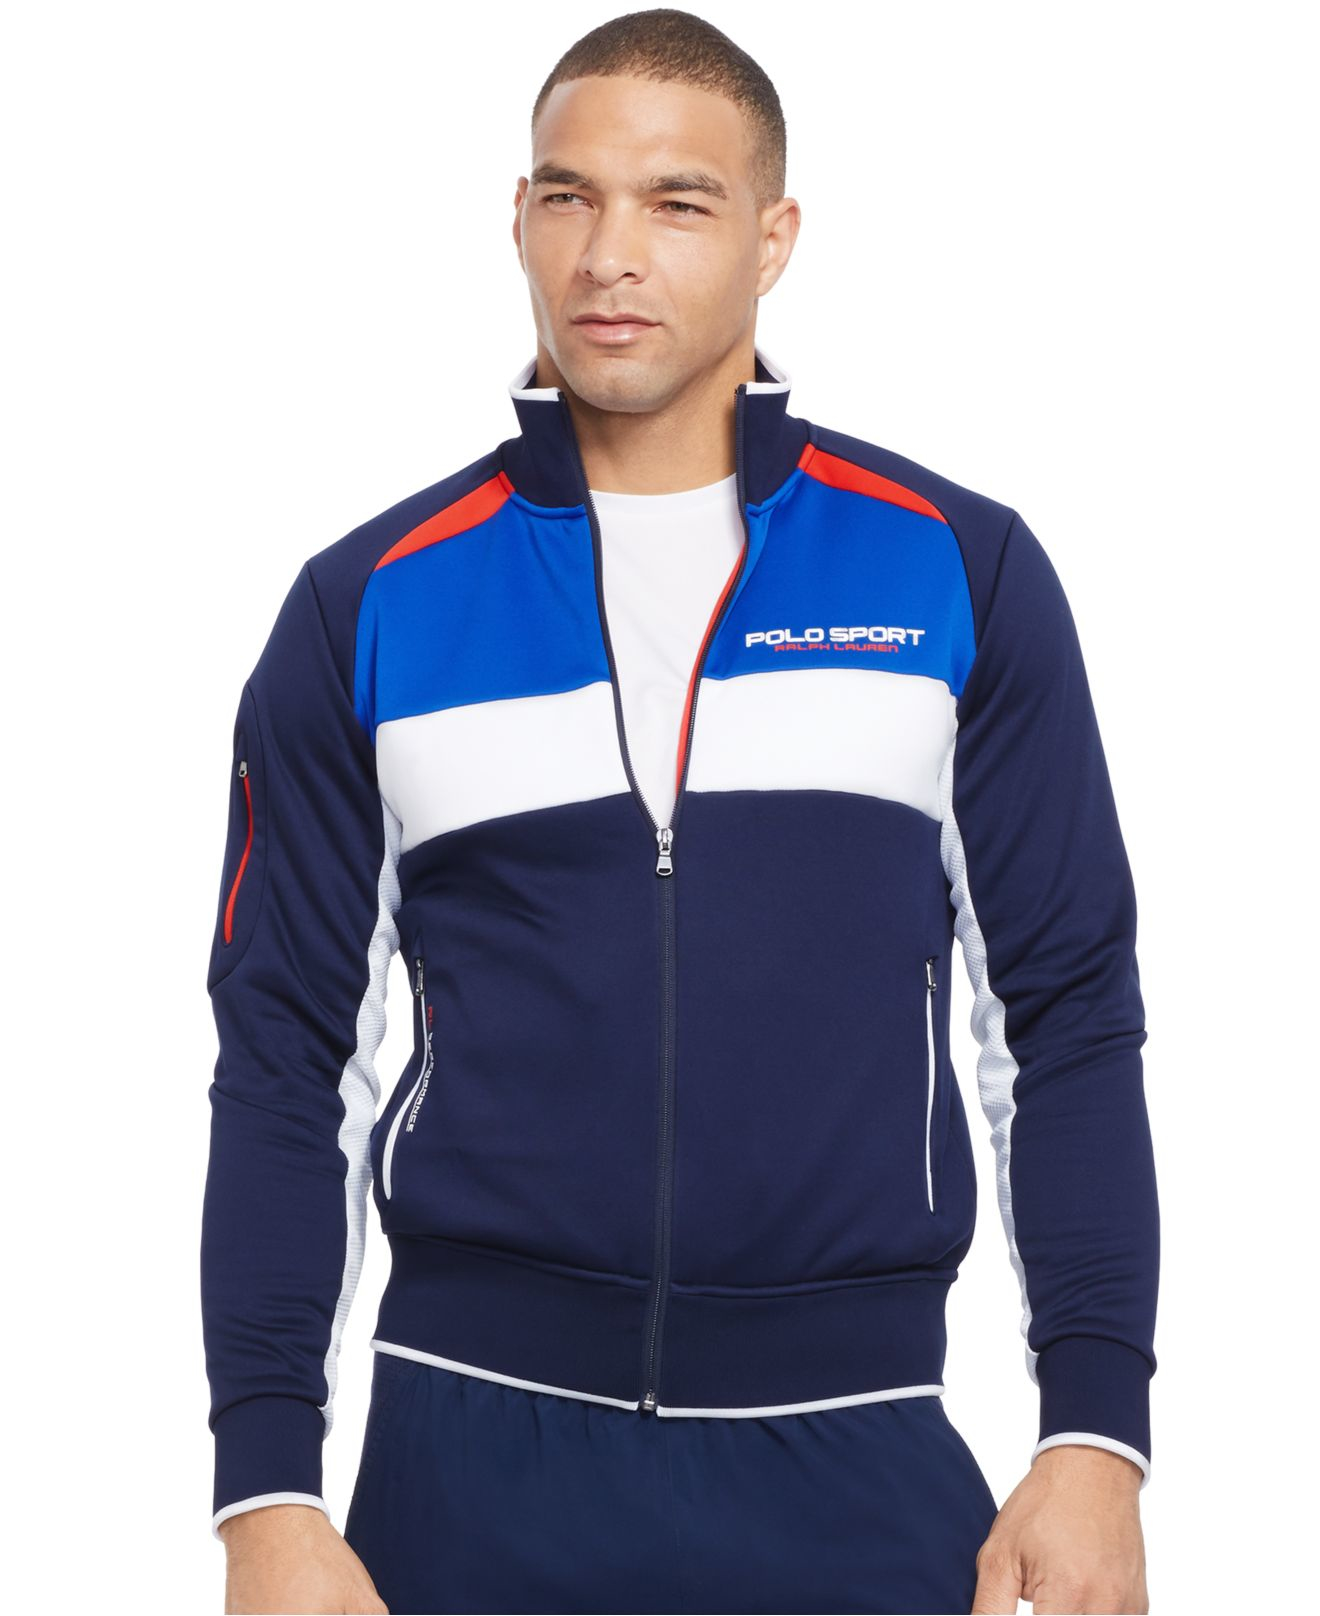 Polo ralph lauren Polo Sport Colorblocked Track Jacket in Blue for Men